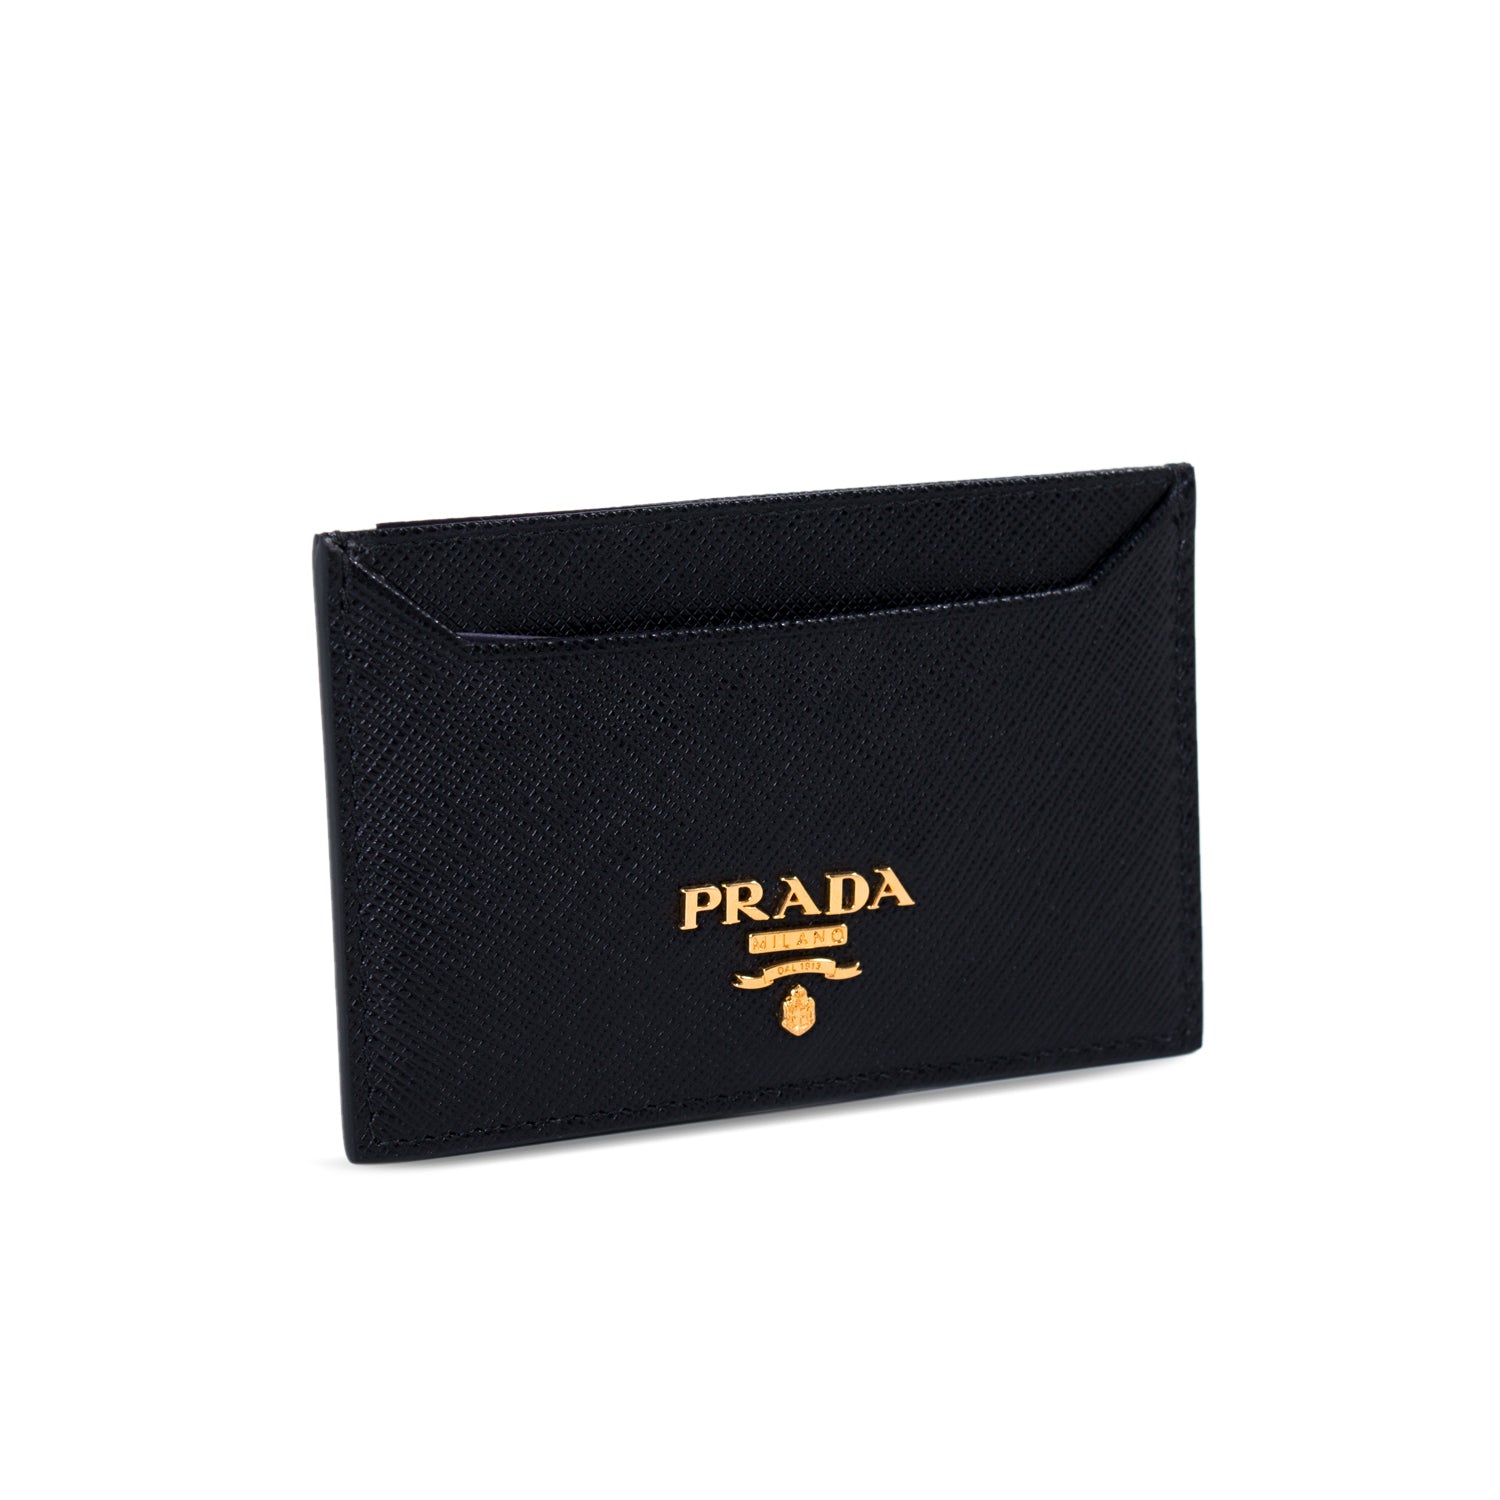 Shop authentic Prada Saffiano Leather Card Holder at revogue for just ...